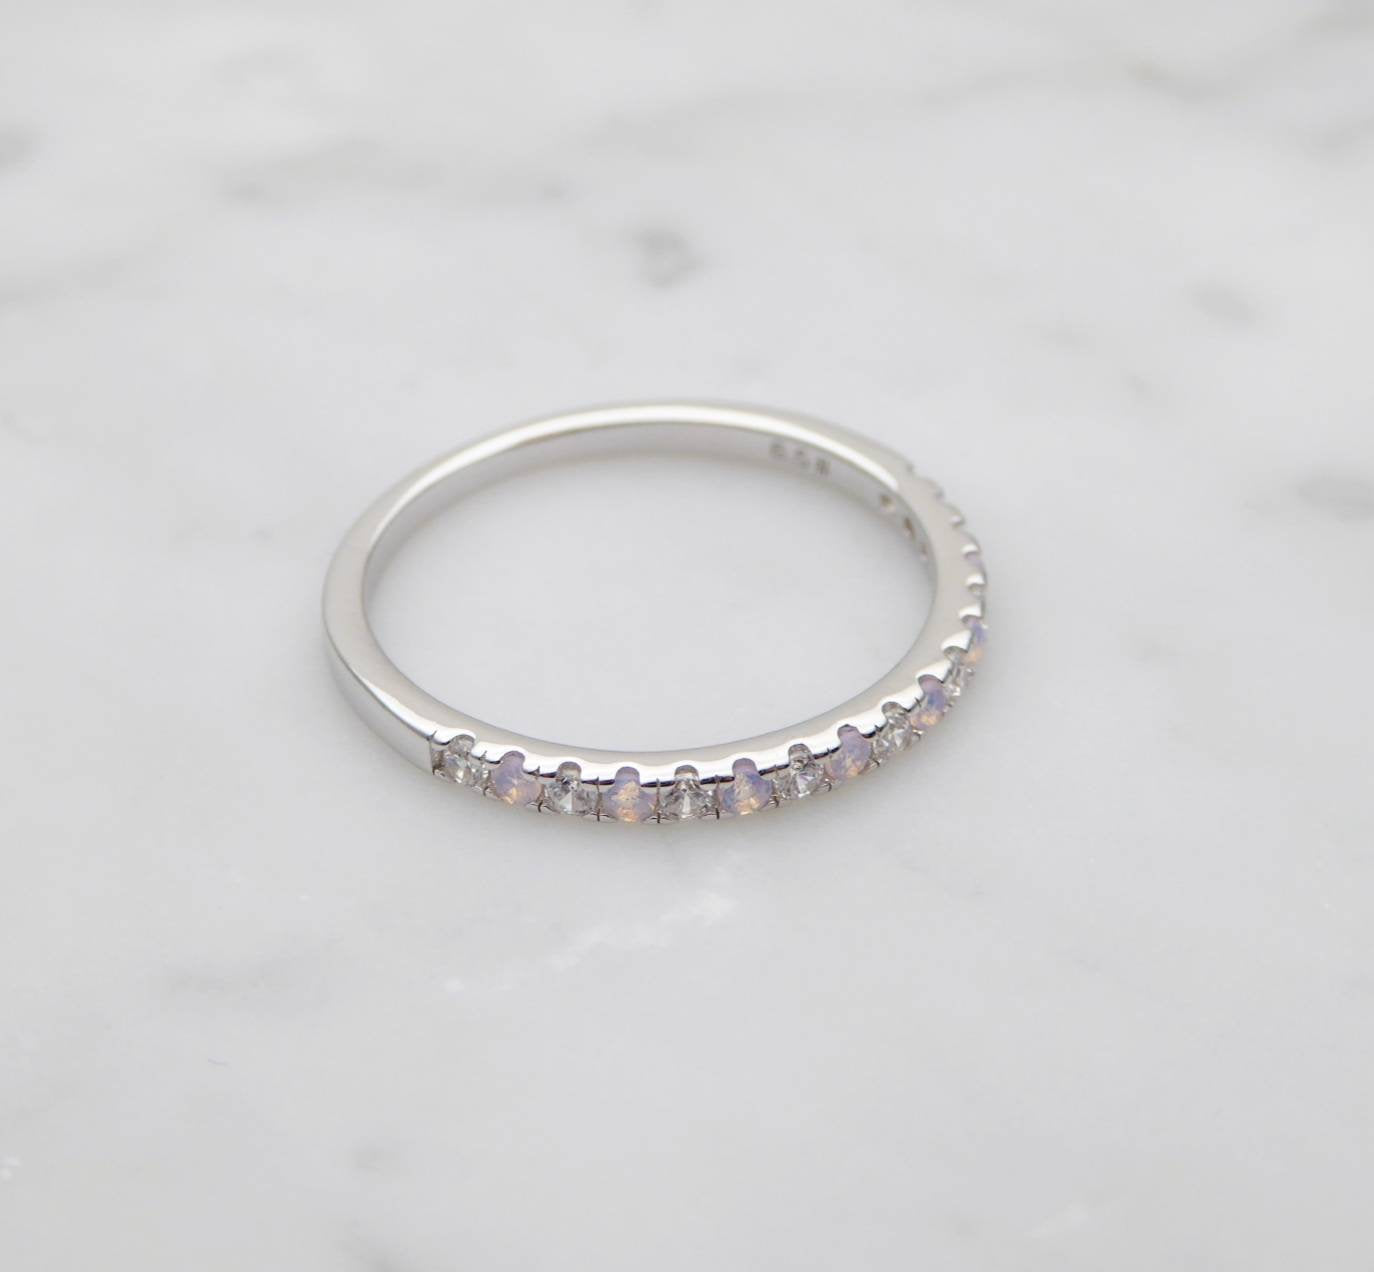 Opal & Man Made Diamond Simulant 1.8mm wide Half Eternity ring  in white gold or Silver - stacking ring - wedding band - engagement ring